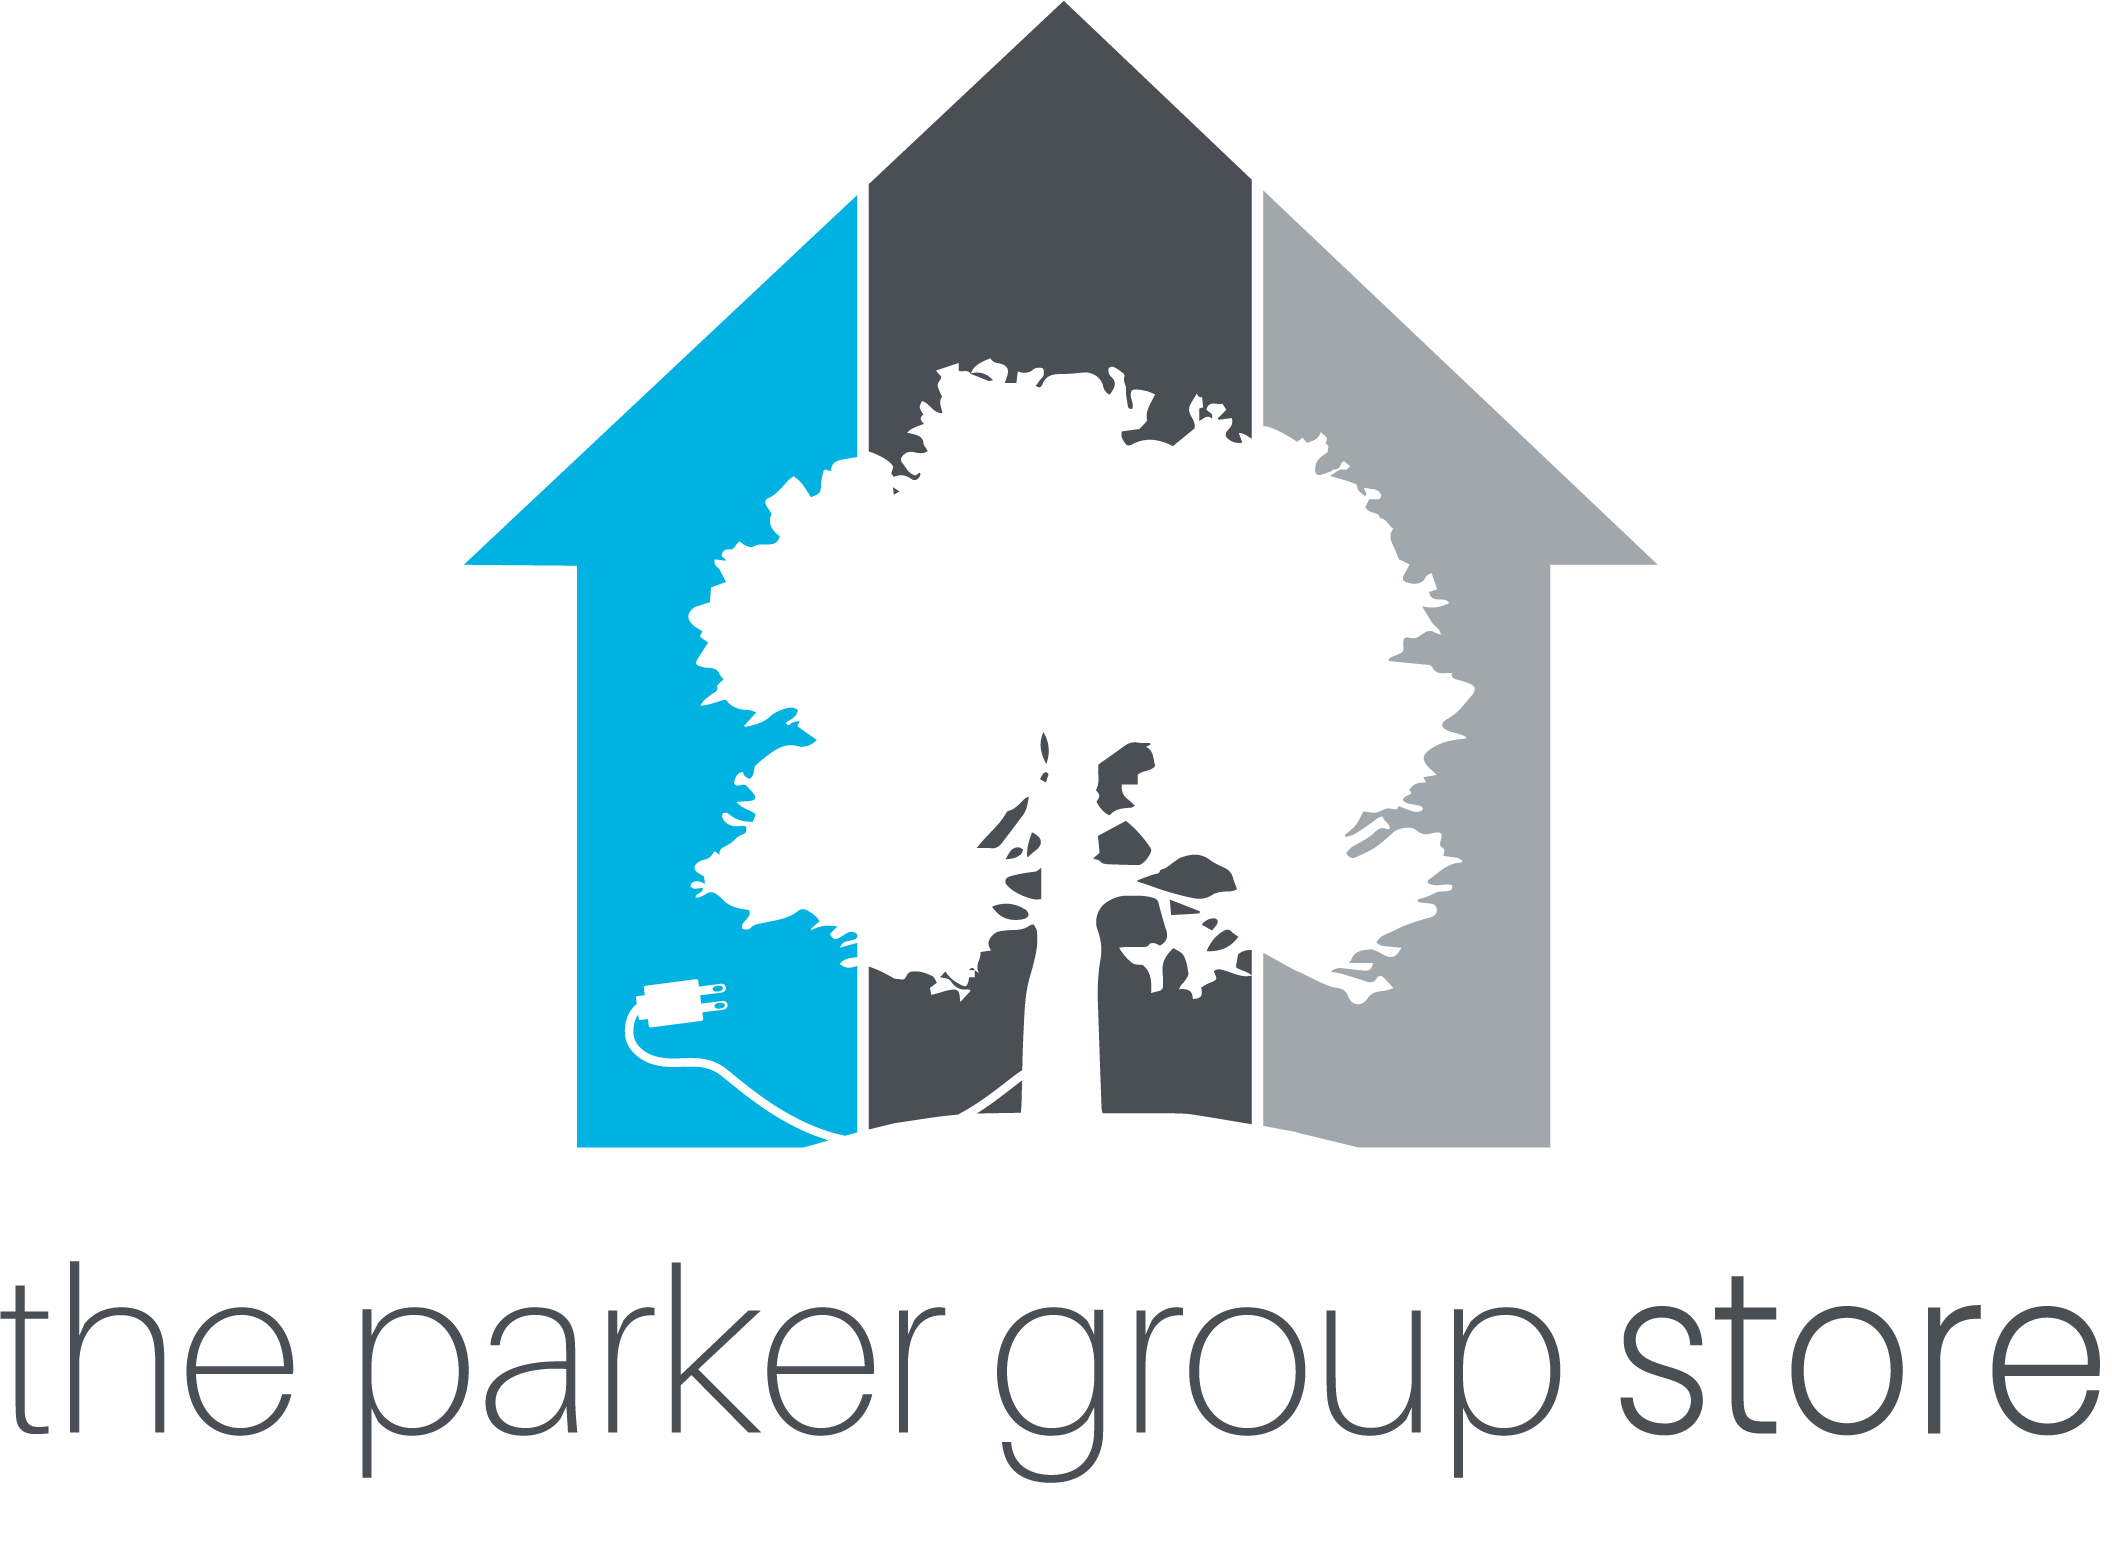 The Parker Group Store